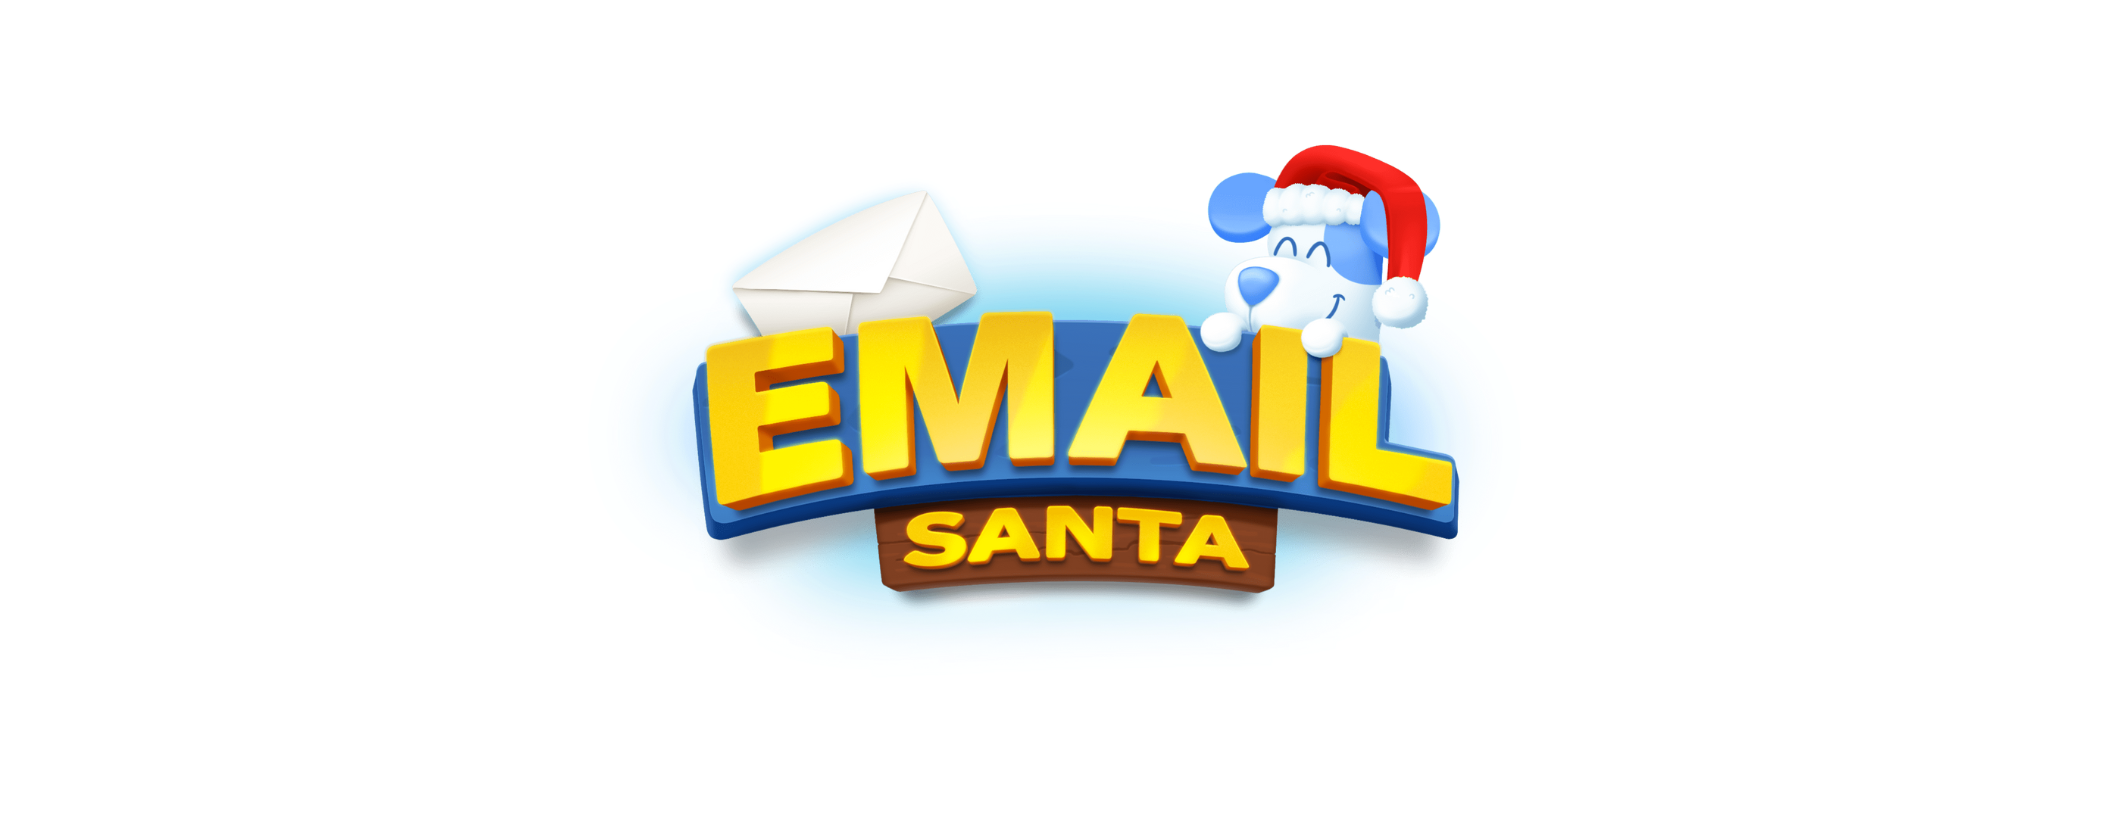 a blue cartoon dog with a Santa hat on his head above the text "Email Santa"